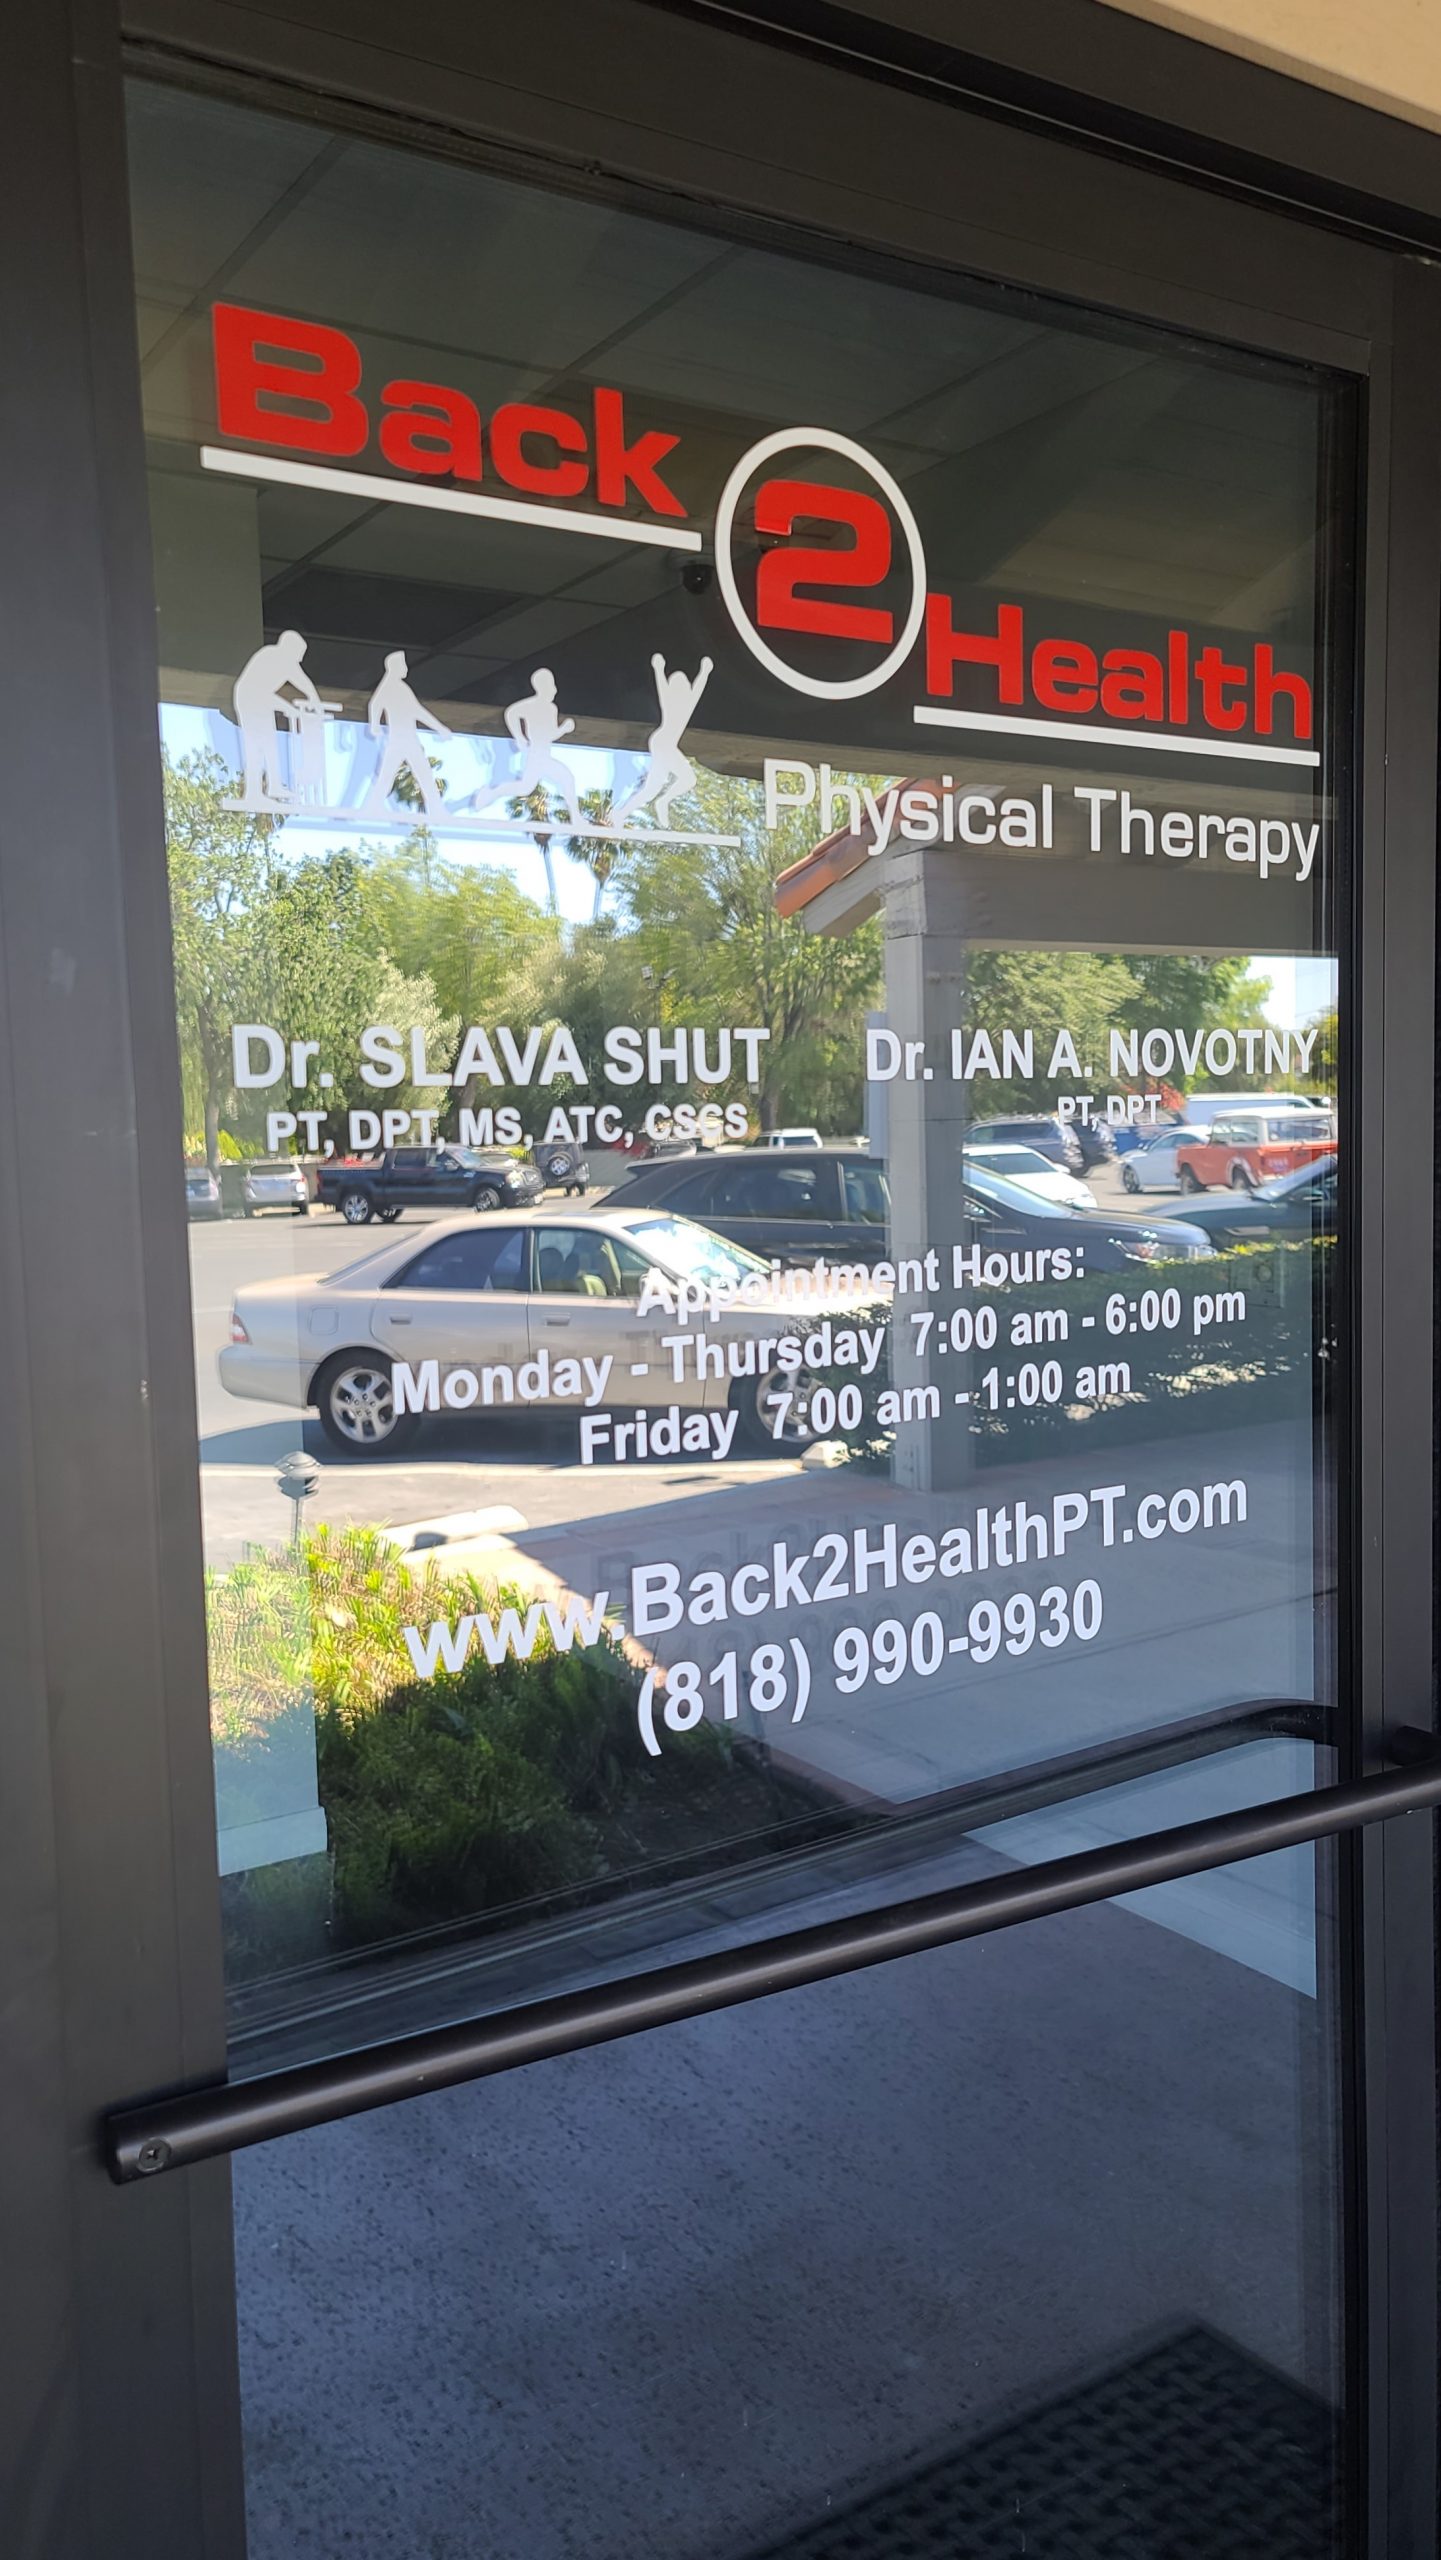 You are currently viewing Doorway Window Graphics for Back 2 Health in Encino